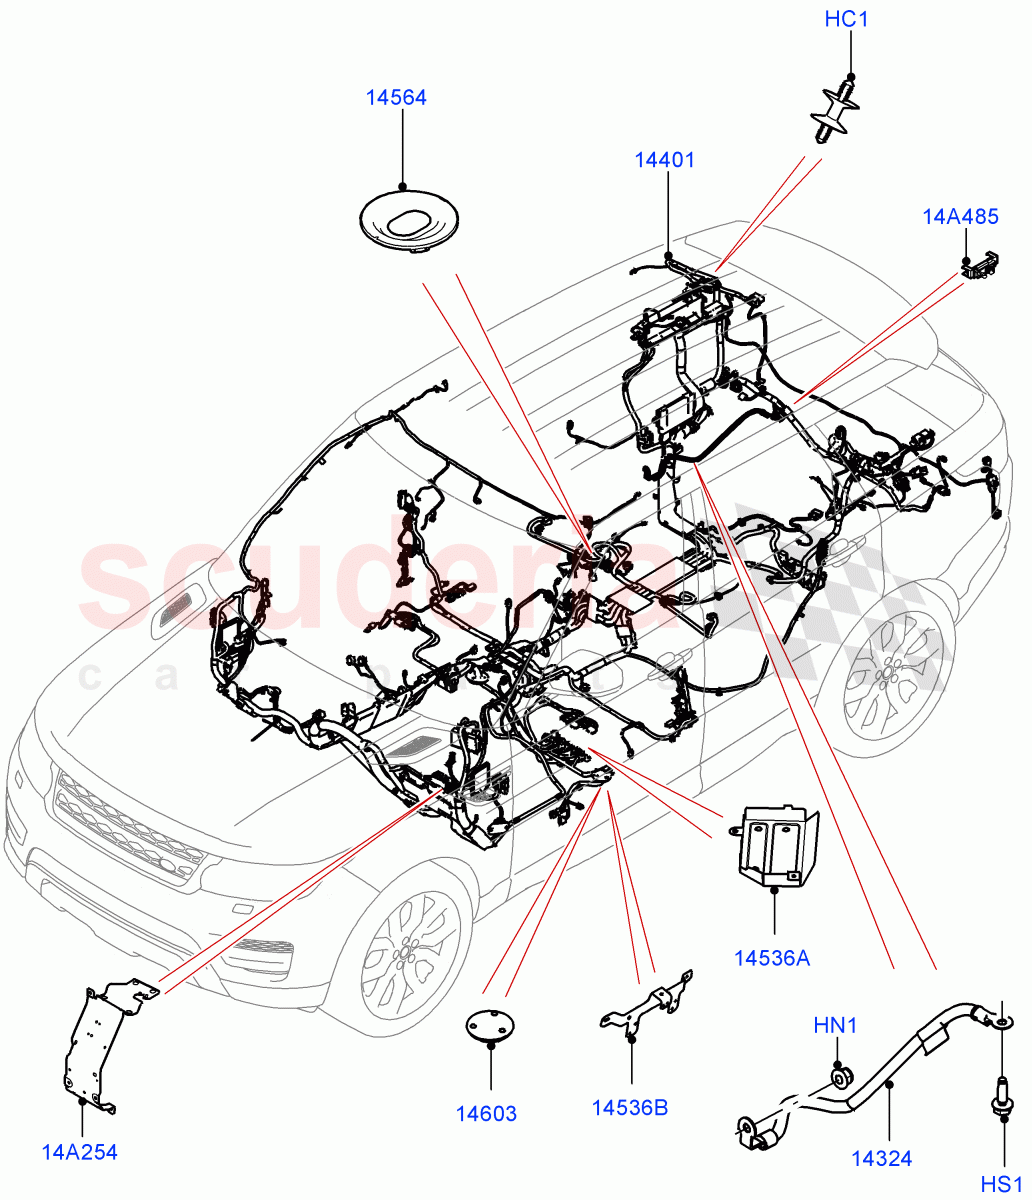 Electrical Wiring - Engine And Dash(Main Harness)((V)FROMFA000001,(V)TOFA999999) of Land Rover Land Rover Range Rover Sport (2014+) [2.0 Turbo Petrol GTDI]